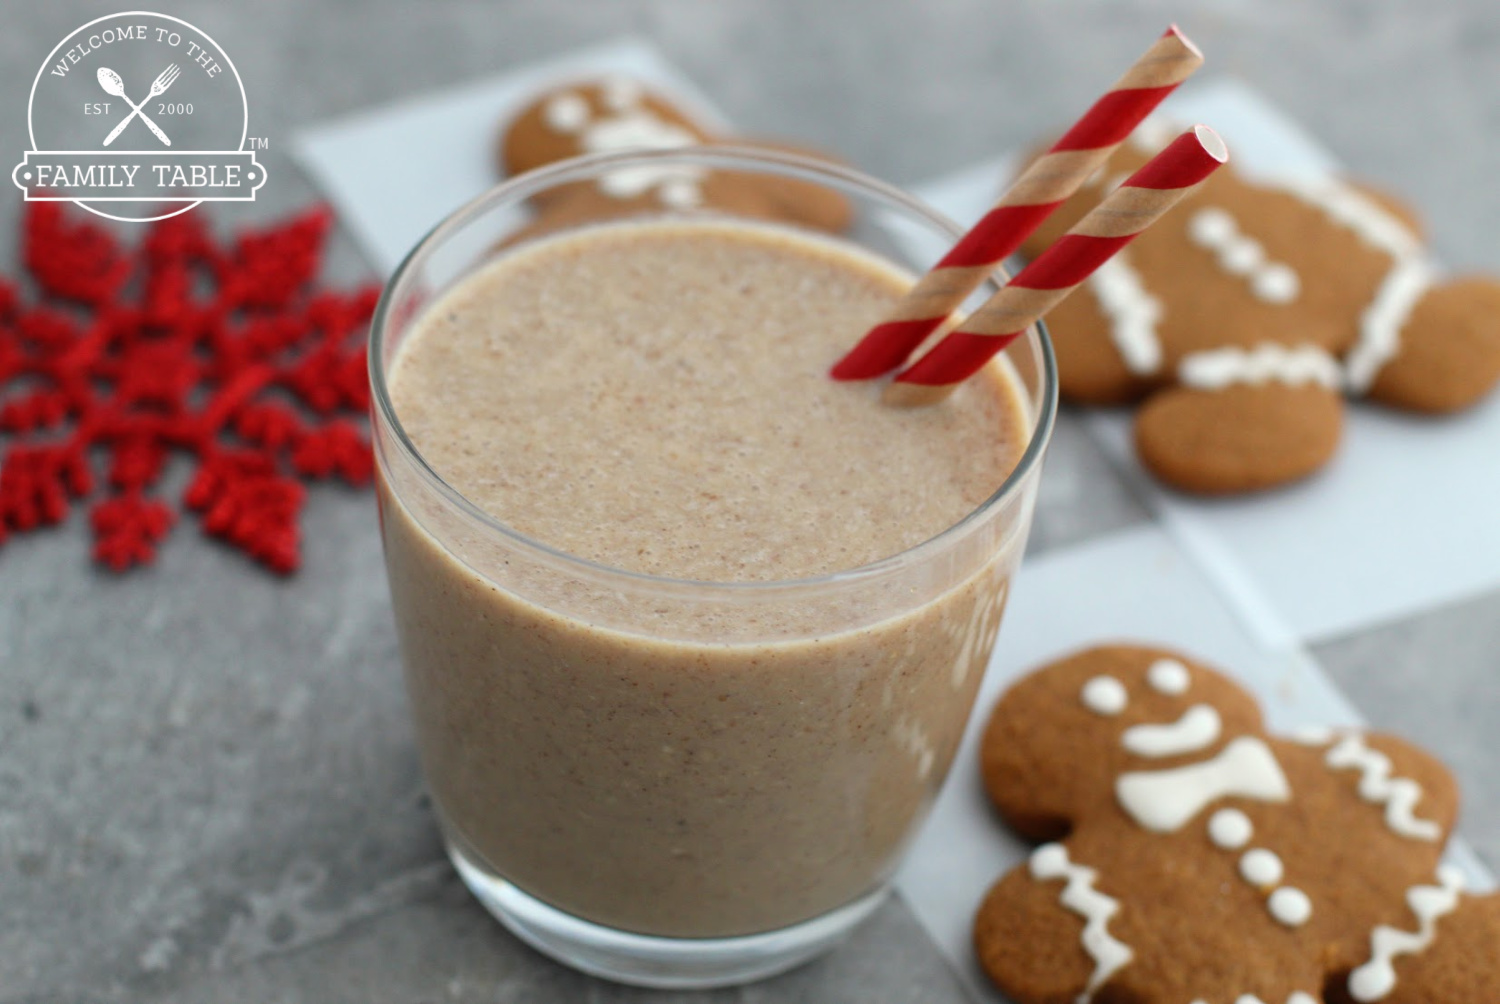 Gingerbread Cookie Smoothie Recipe